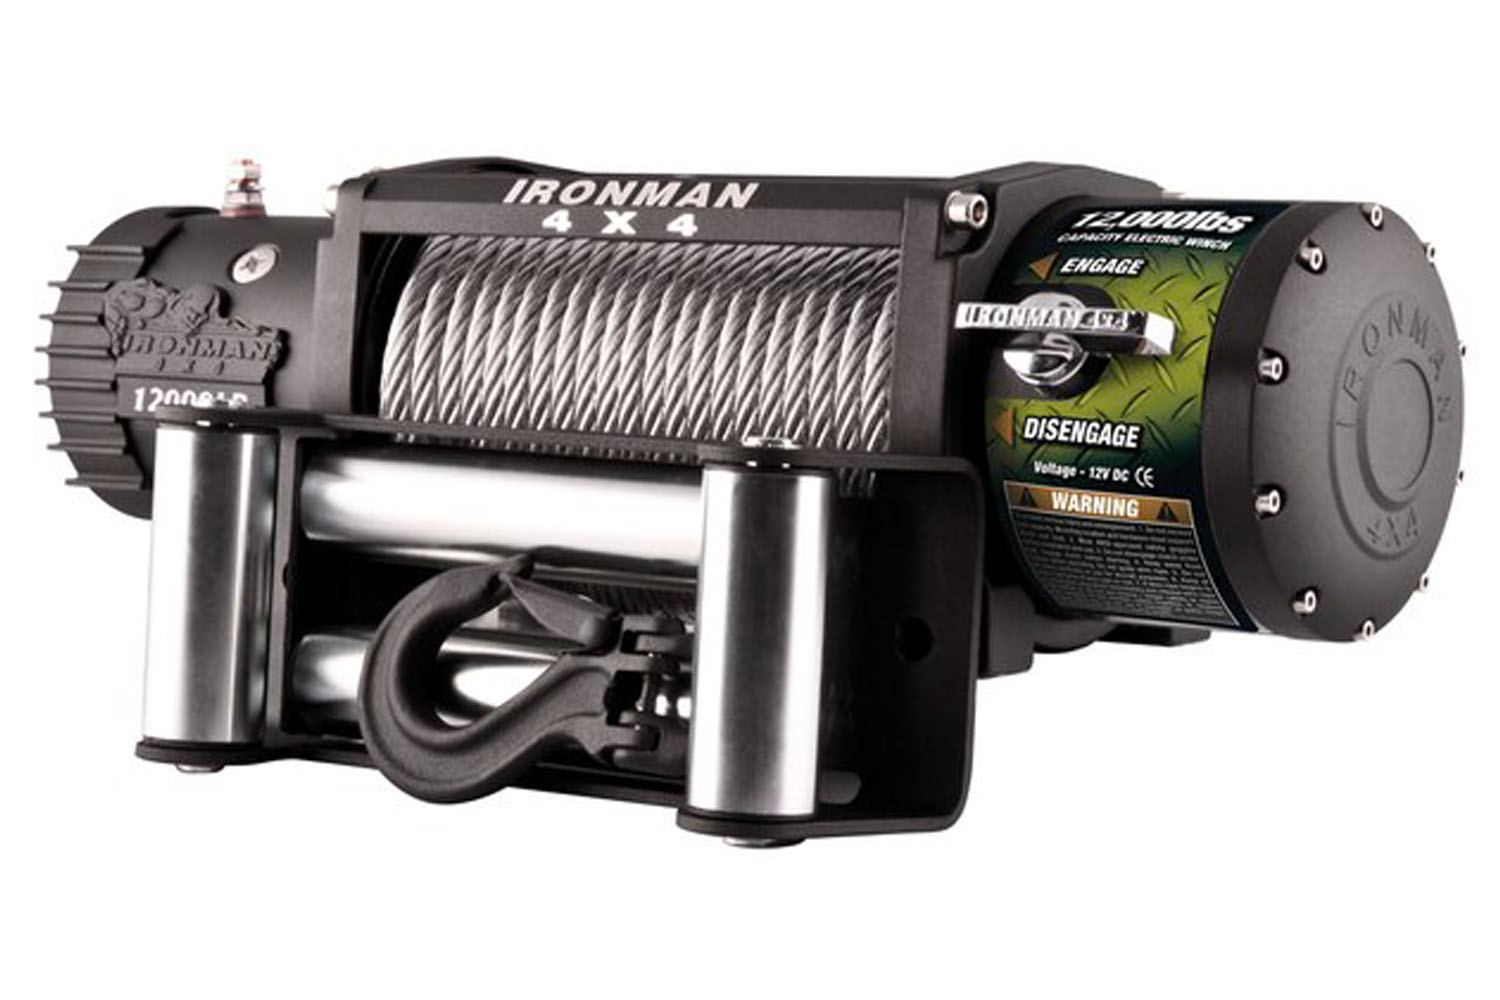 MONSTER WINCH 12000LBS 12v Electric (Steel Cable) Questions & Answers